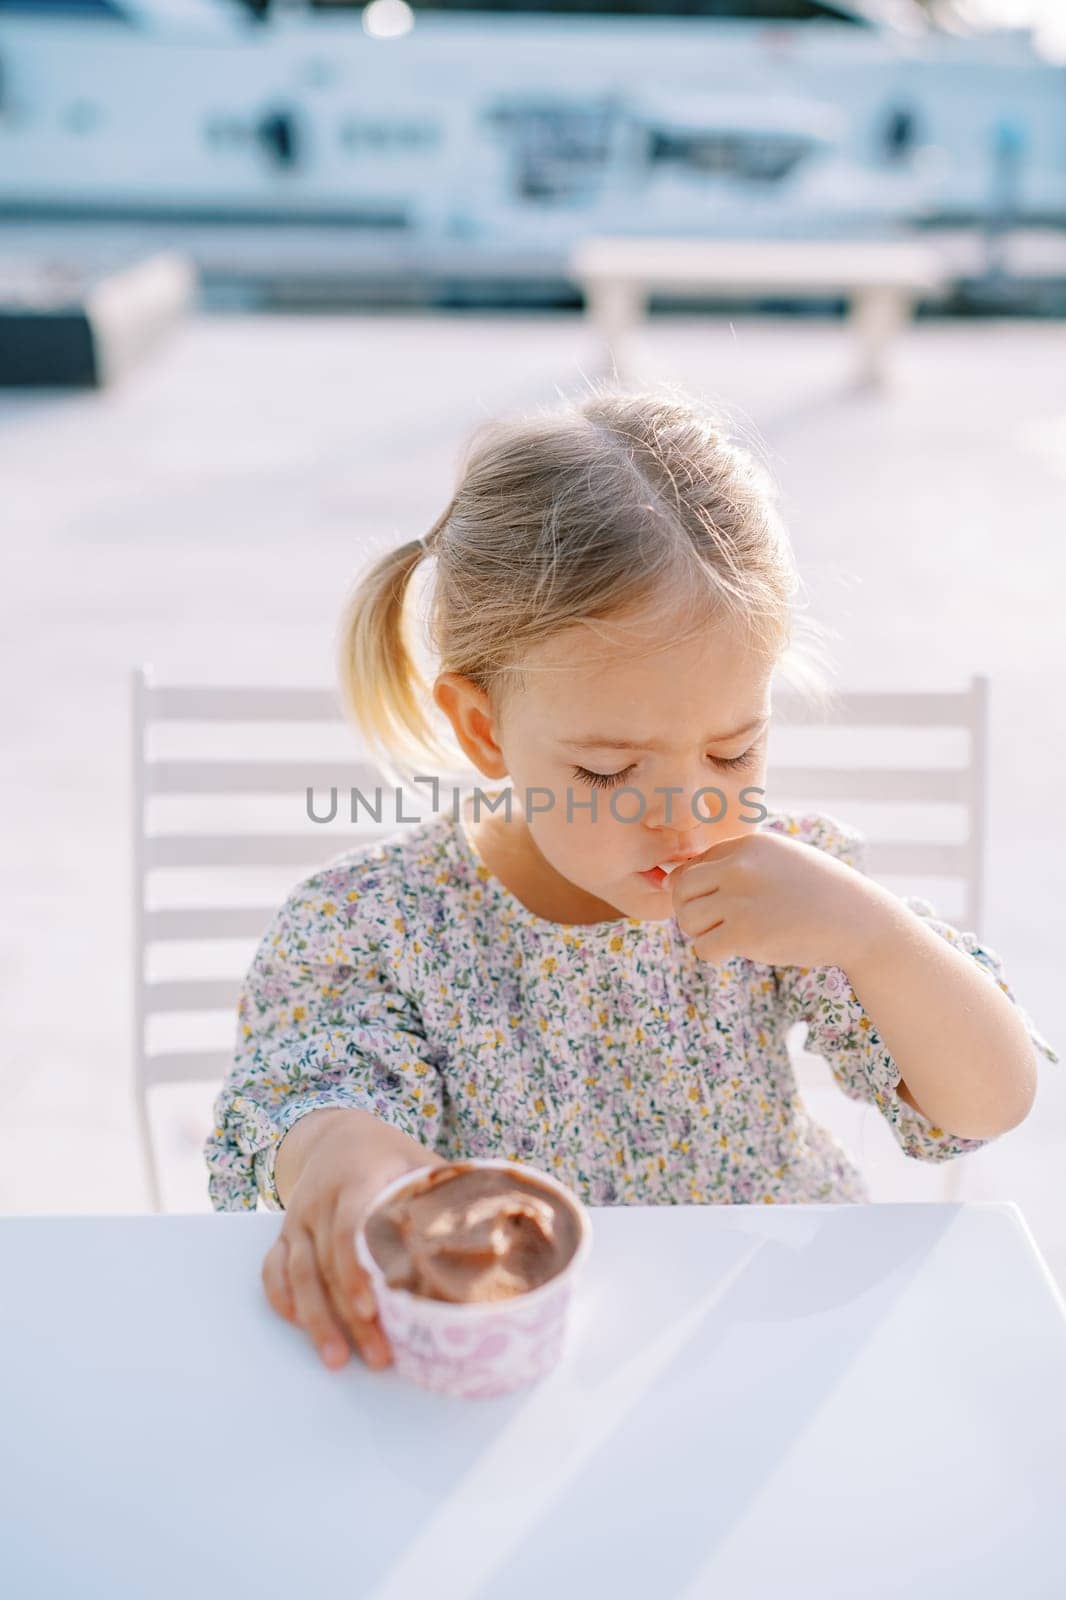 Little girl eats ice cream with a spoon from a cup while sitting at the table. High quality photo